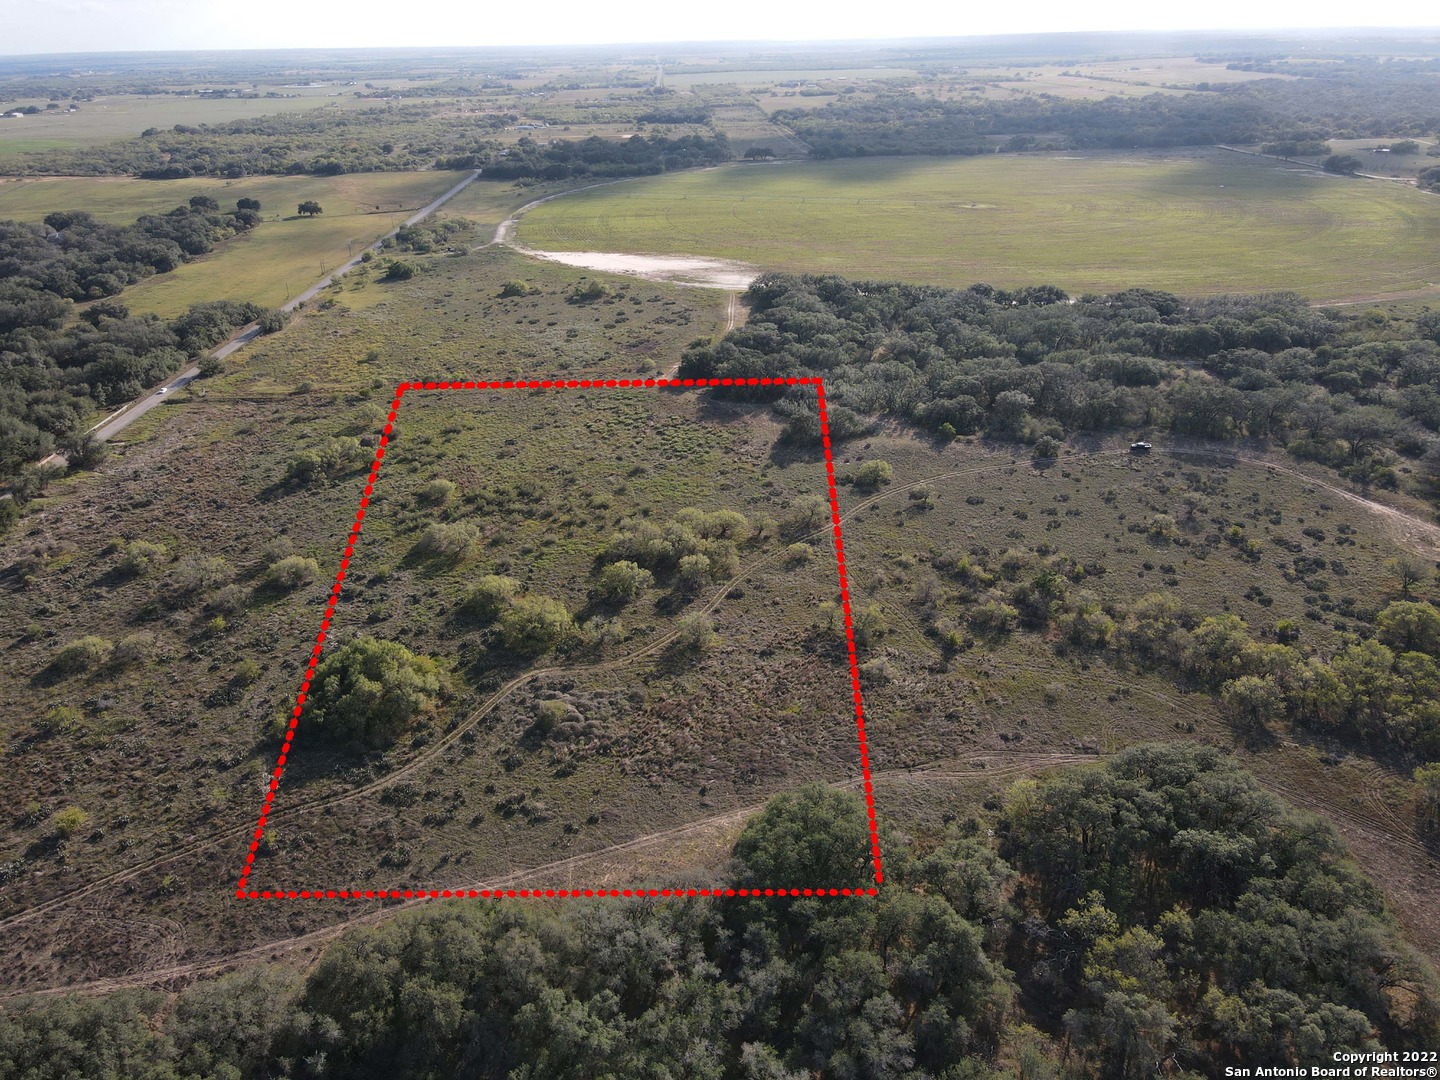 Photo of Tbd Tract 4 Pr Two A Ln in Poteet, TX